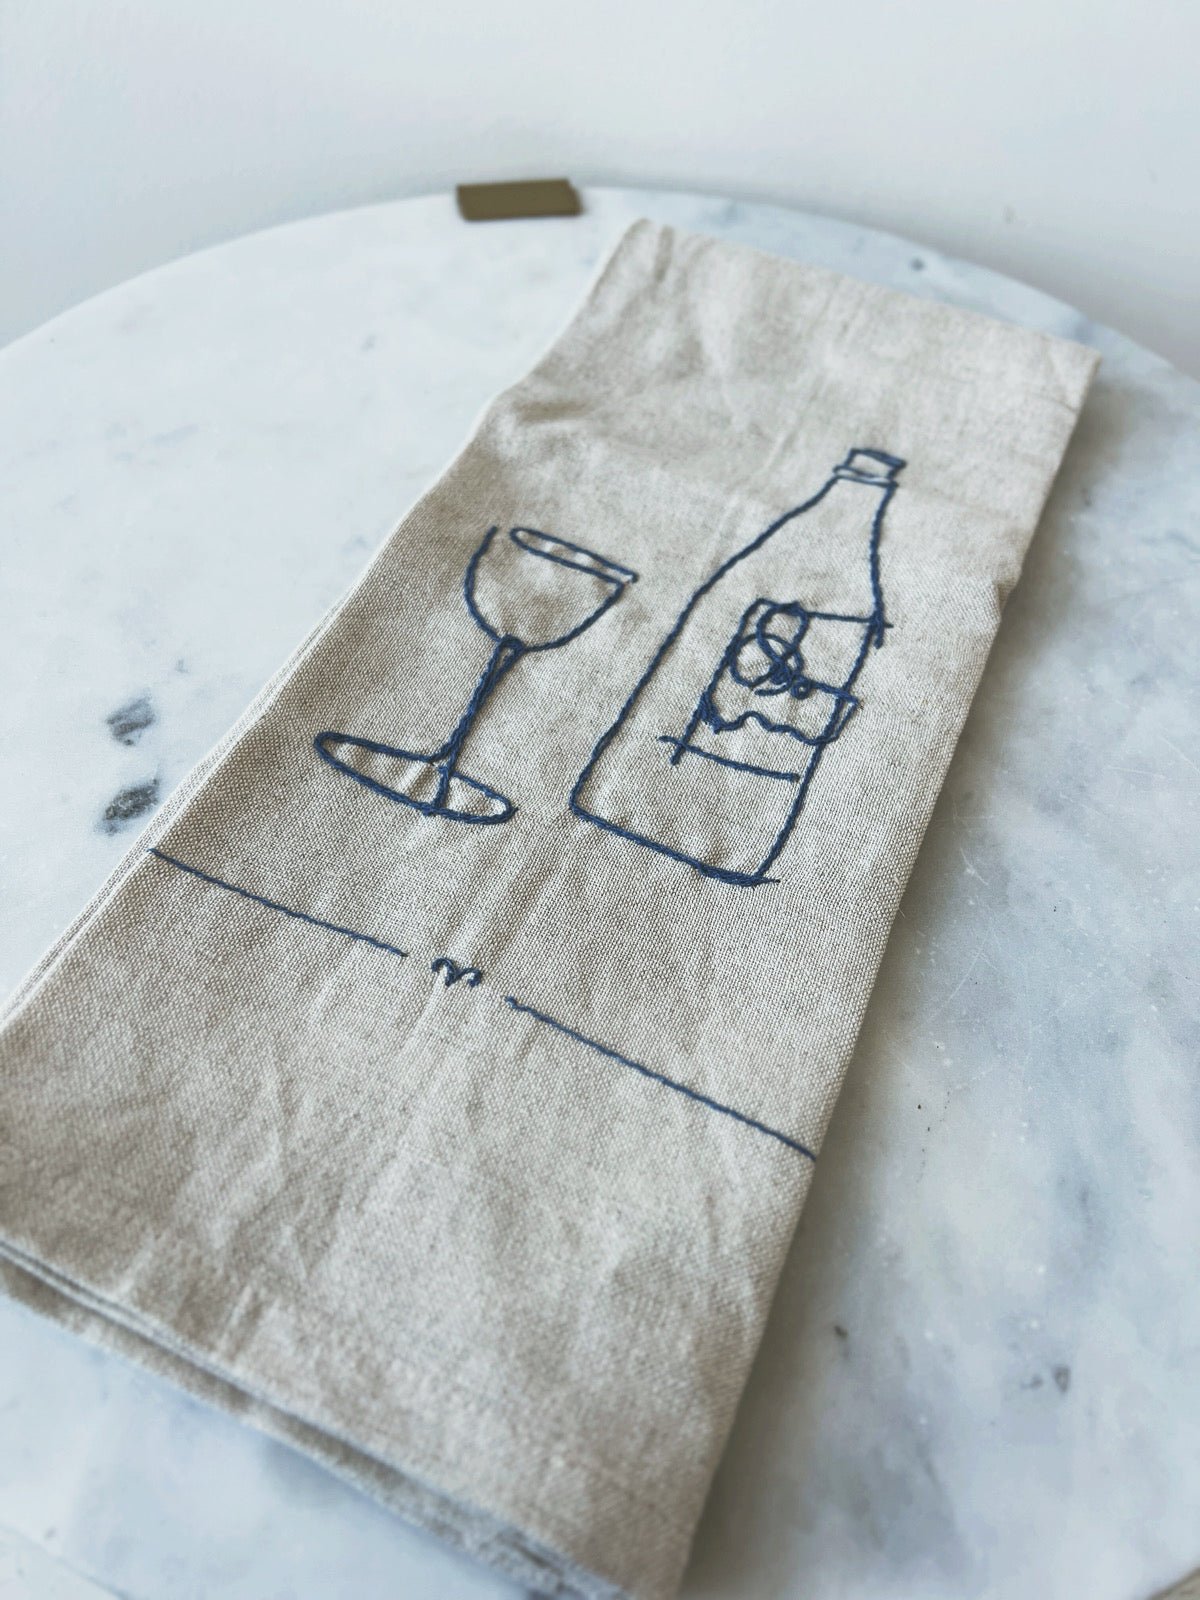 Bottoms Up Embroidered Tea Towels - Spring Sweet